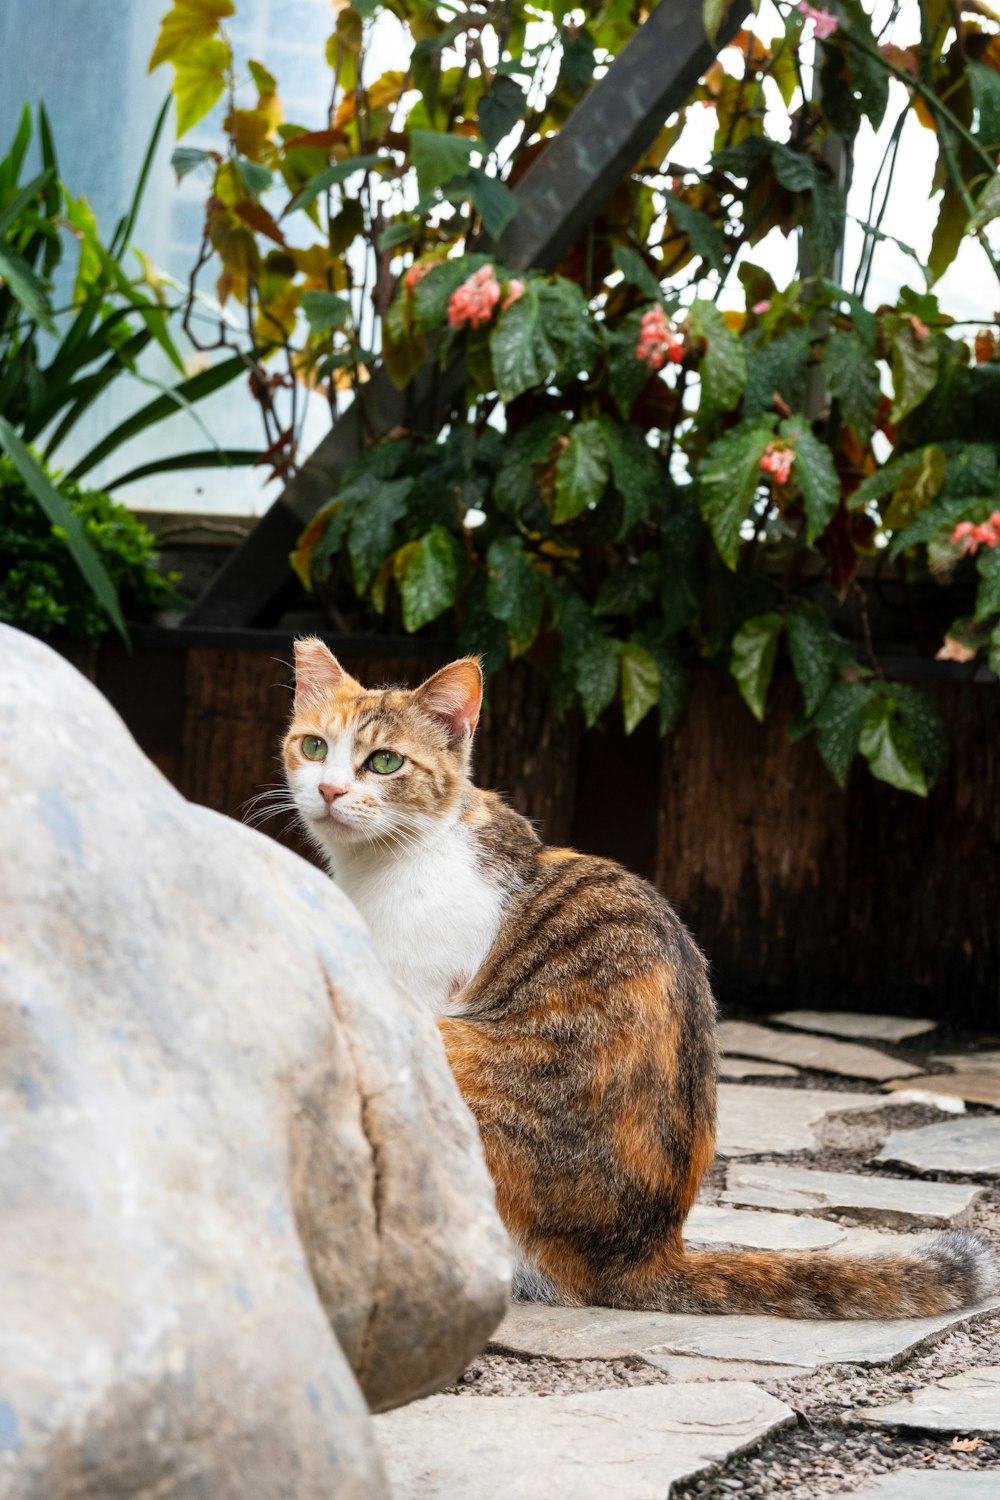 a cat sitting next to a large rock